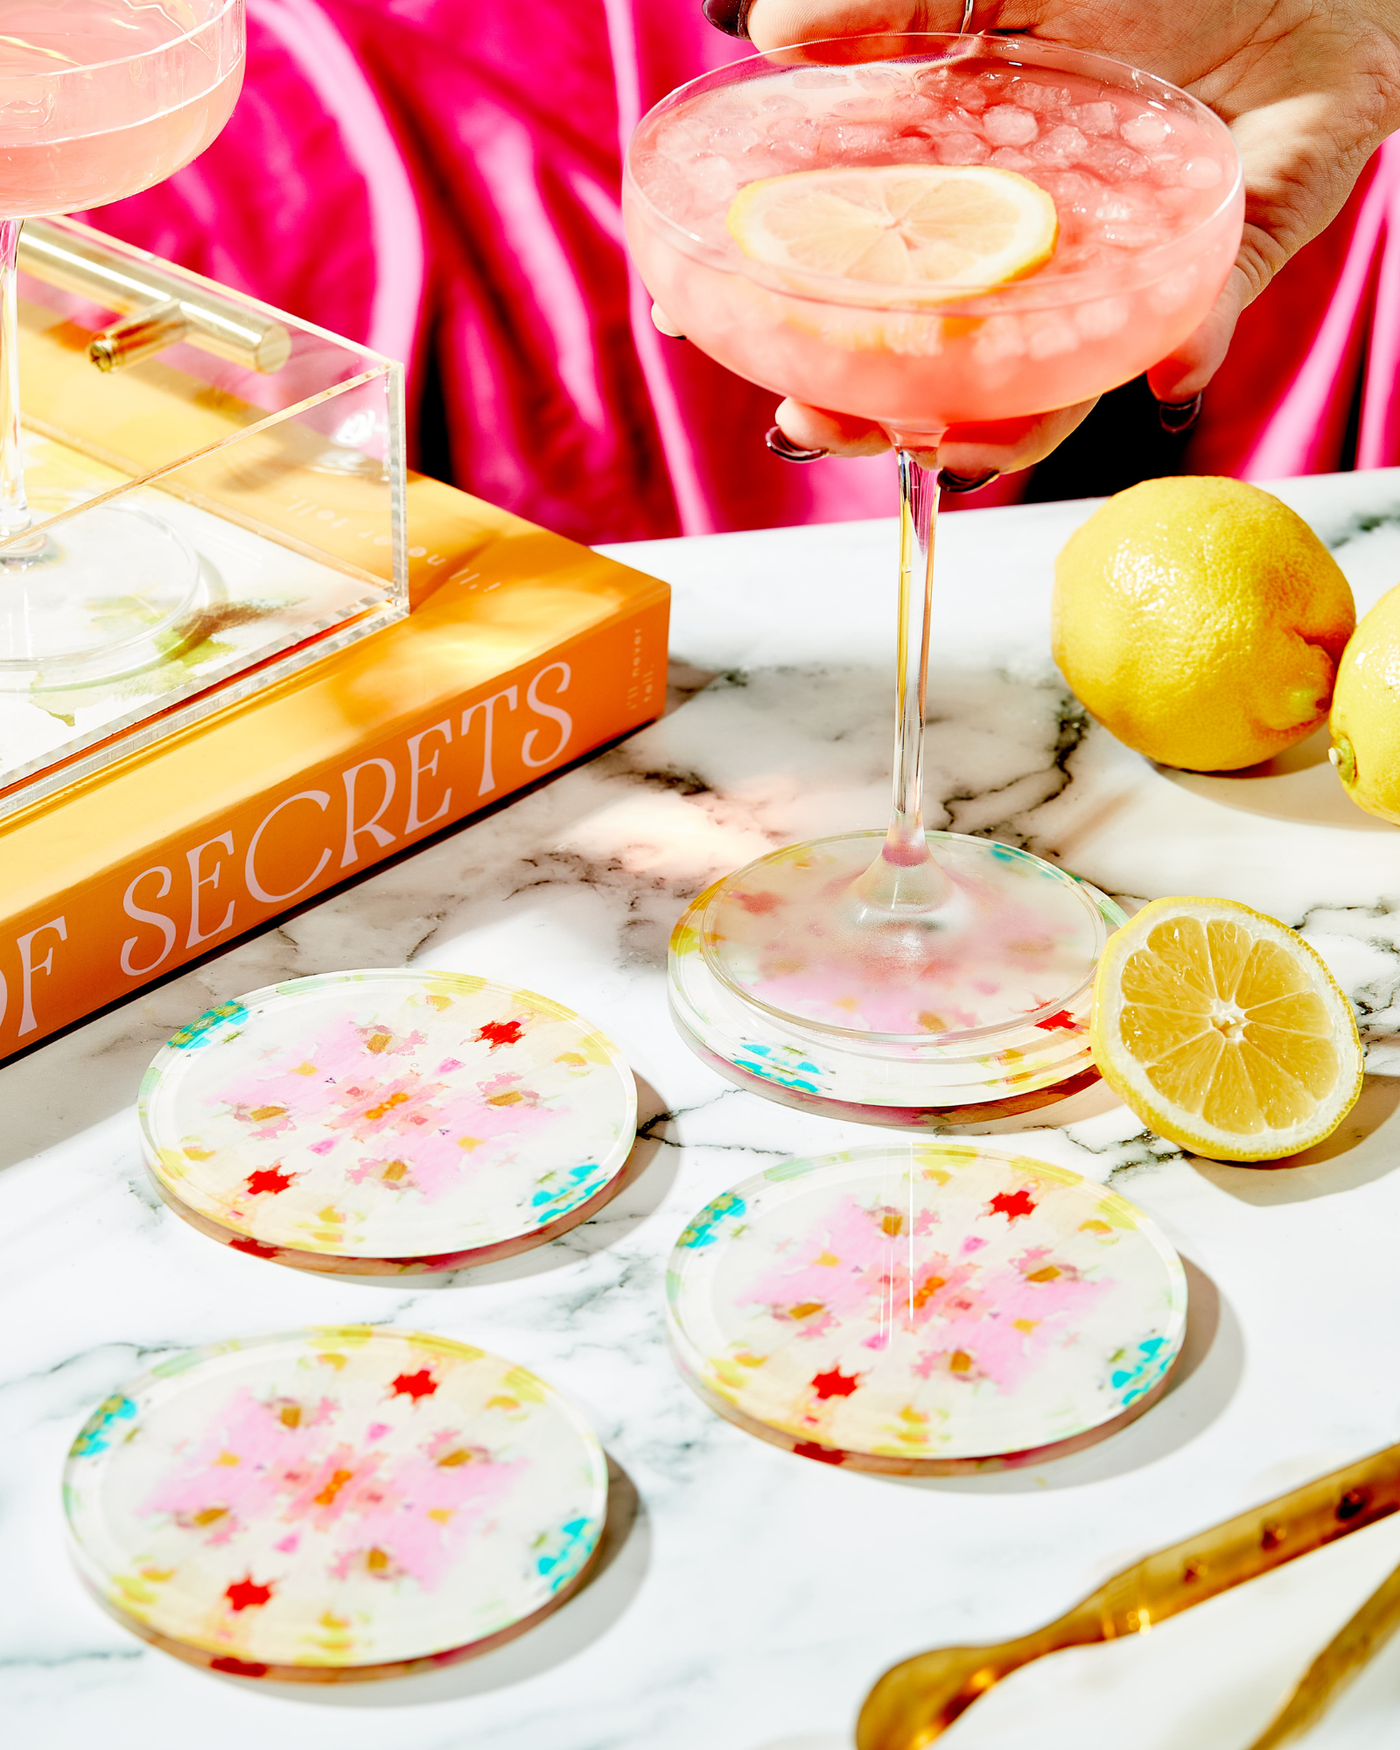 Tart By Taylor - Giverny Coaster | Laura Park Designs x Tart By Taylor